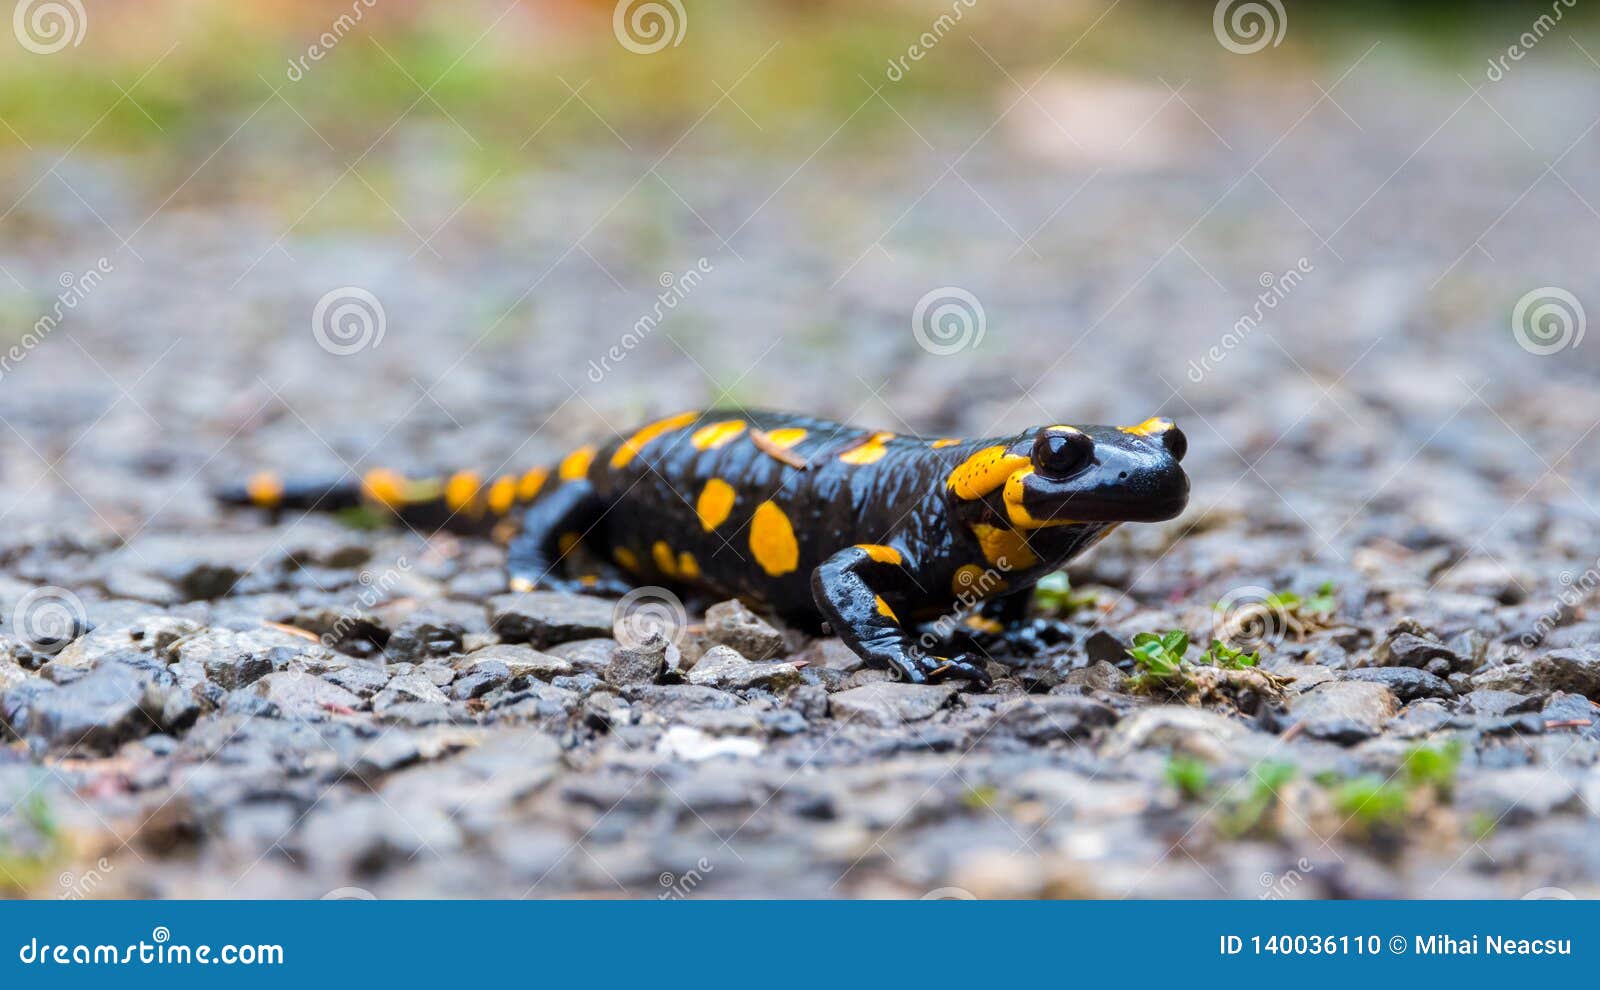 close up of a fire salamander stepping on pebbles, after rain. black amphibian with orange spots.